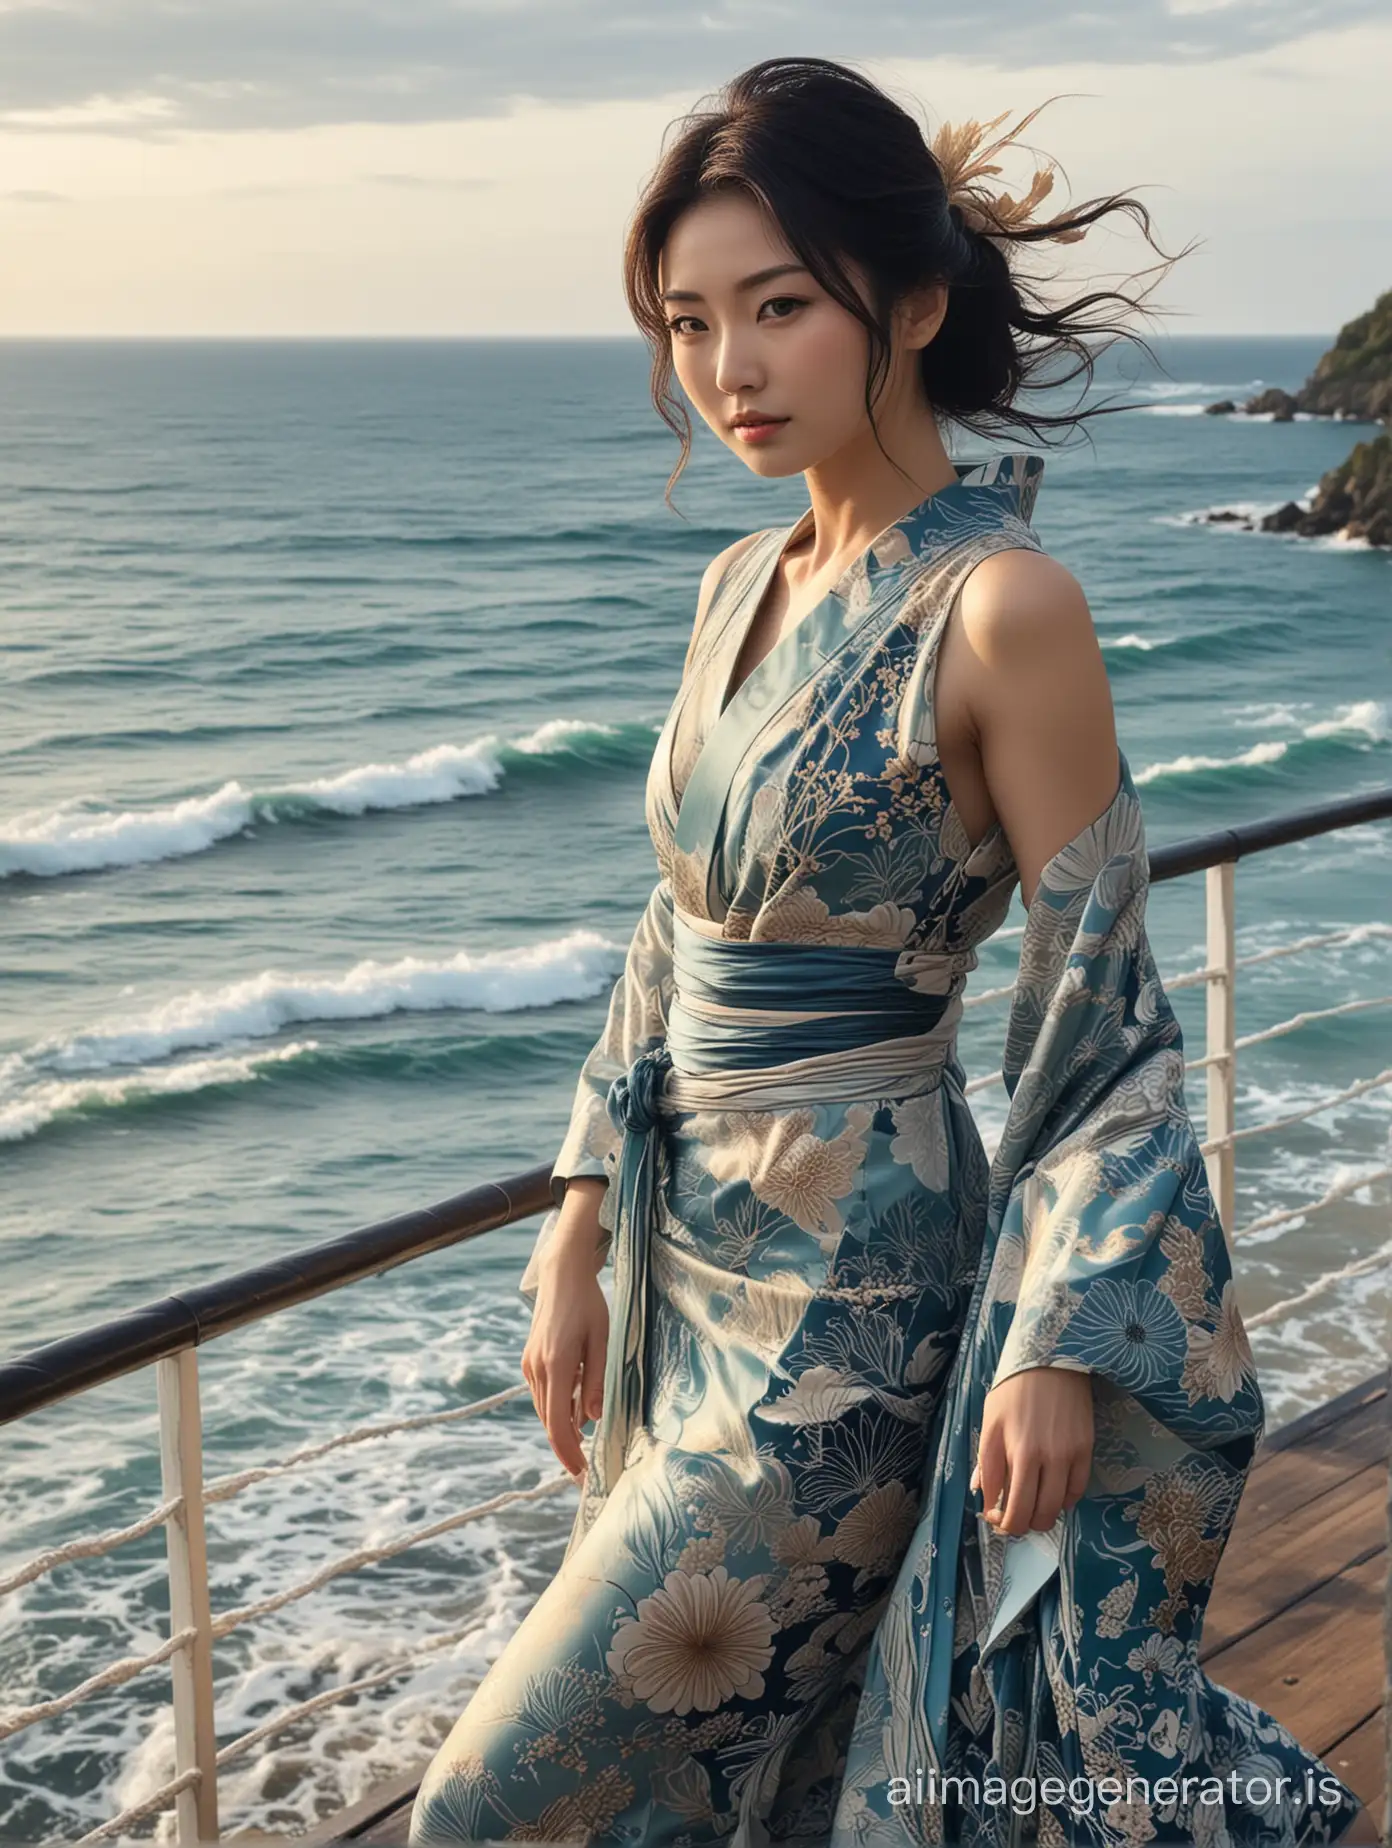 a glamorous bewitching Japanese, best proportion, (close-up ocean view)